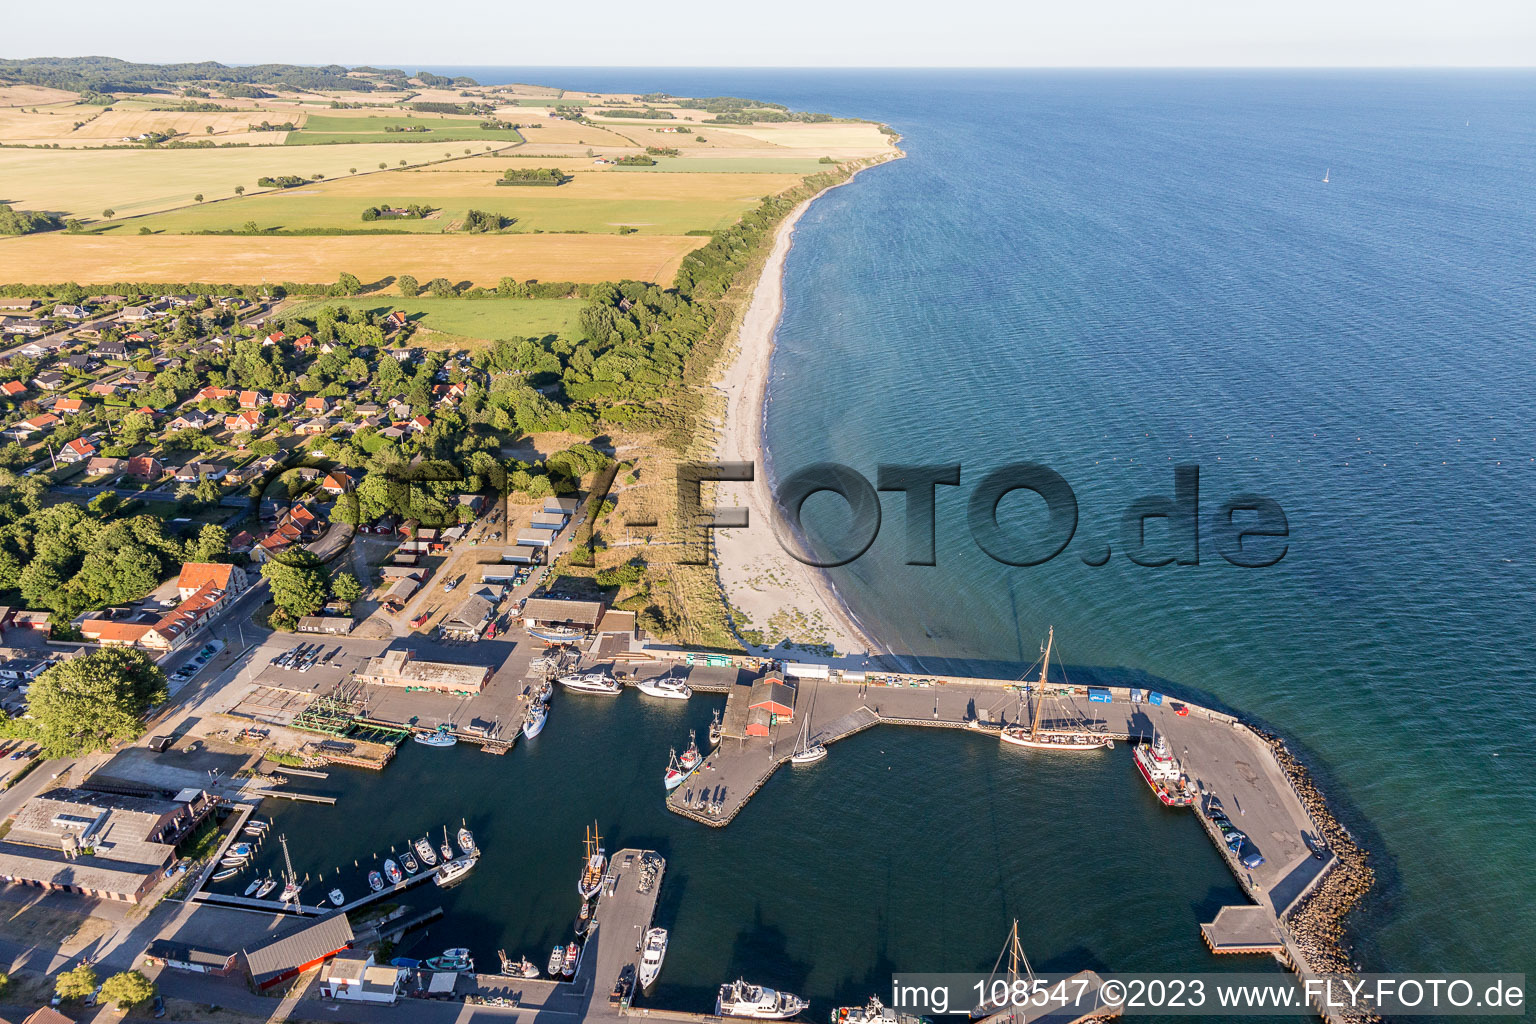 Borre in the state Zealand, Denmark from the drone perspective